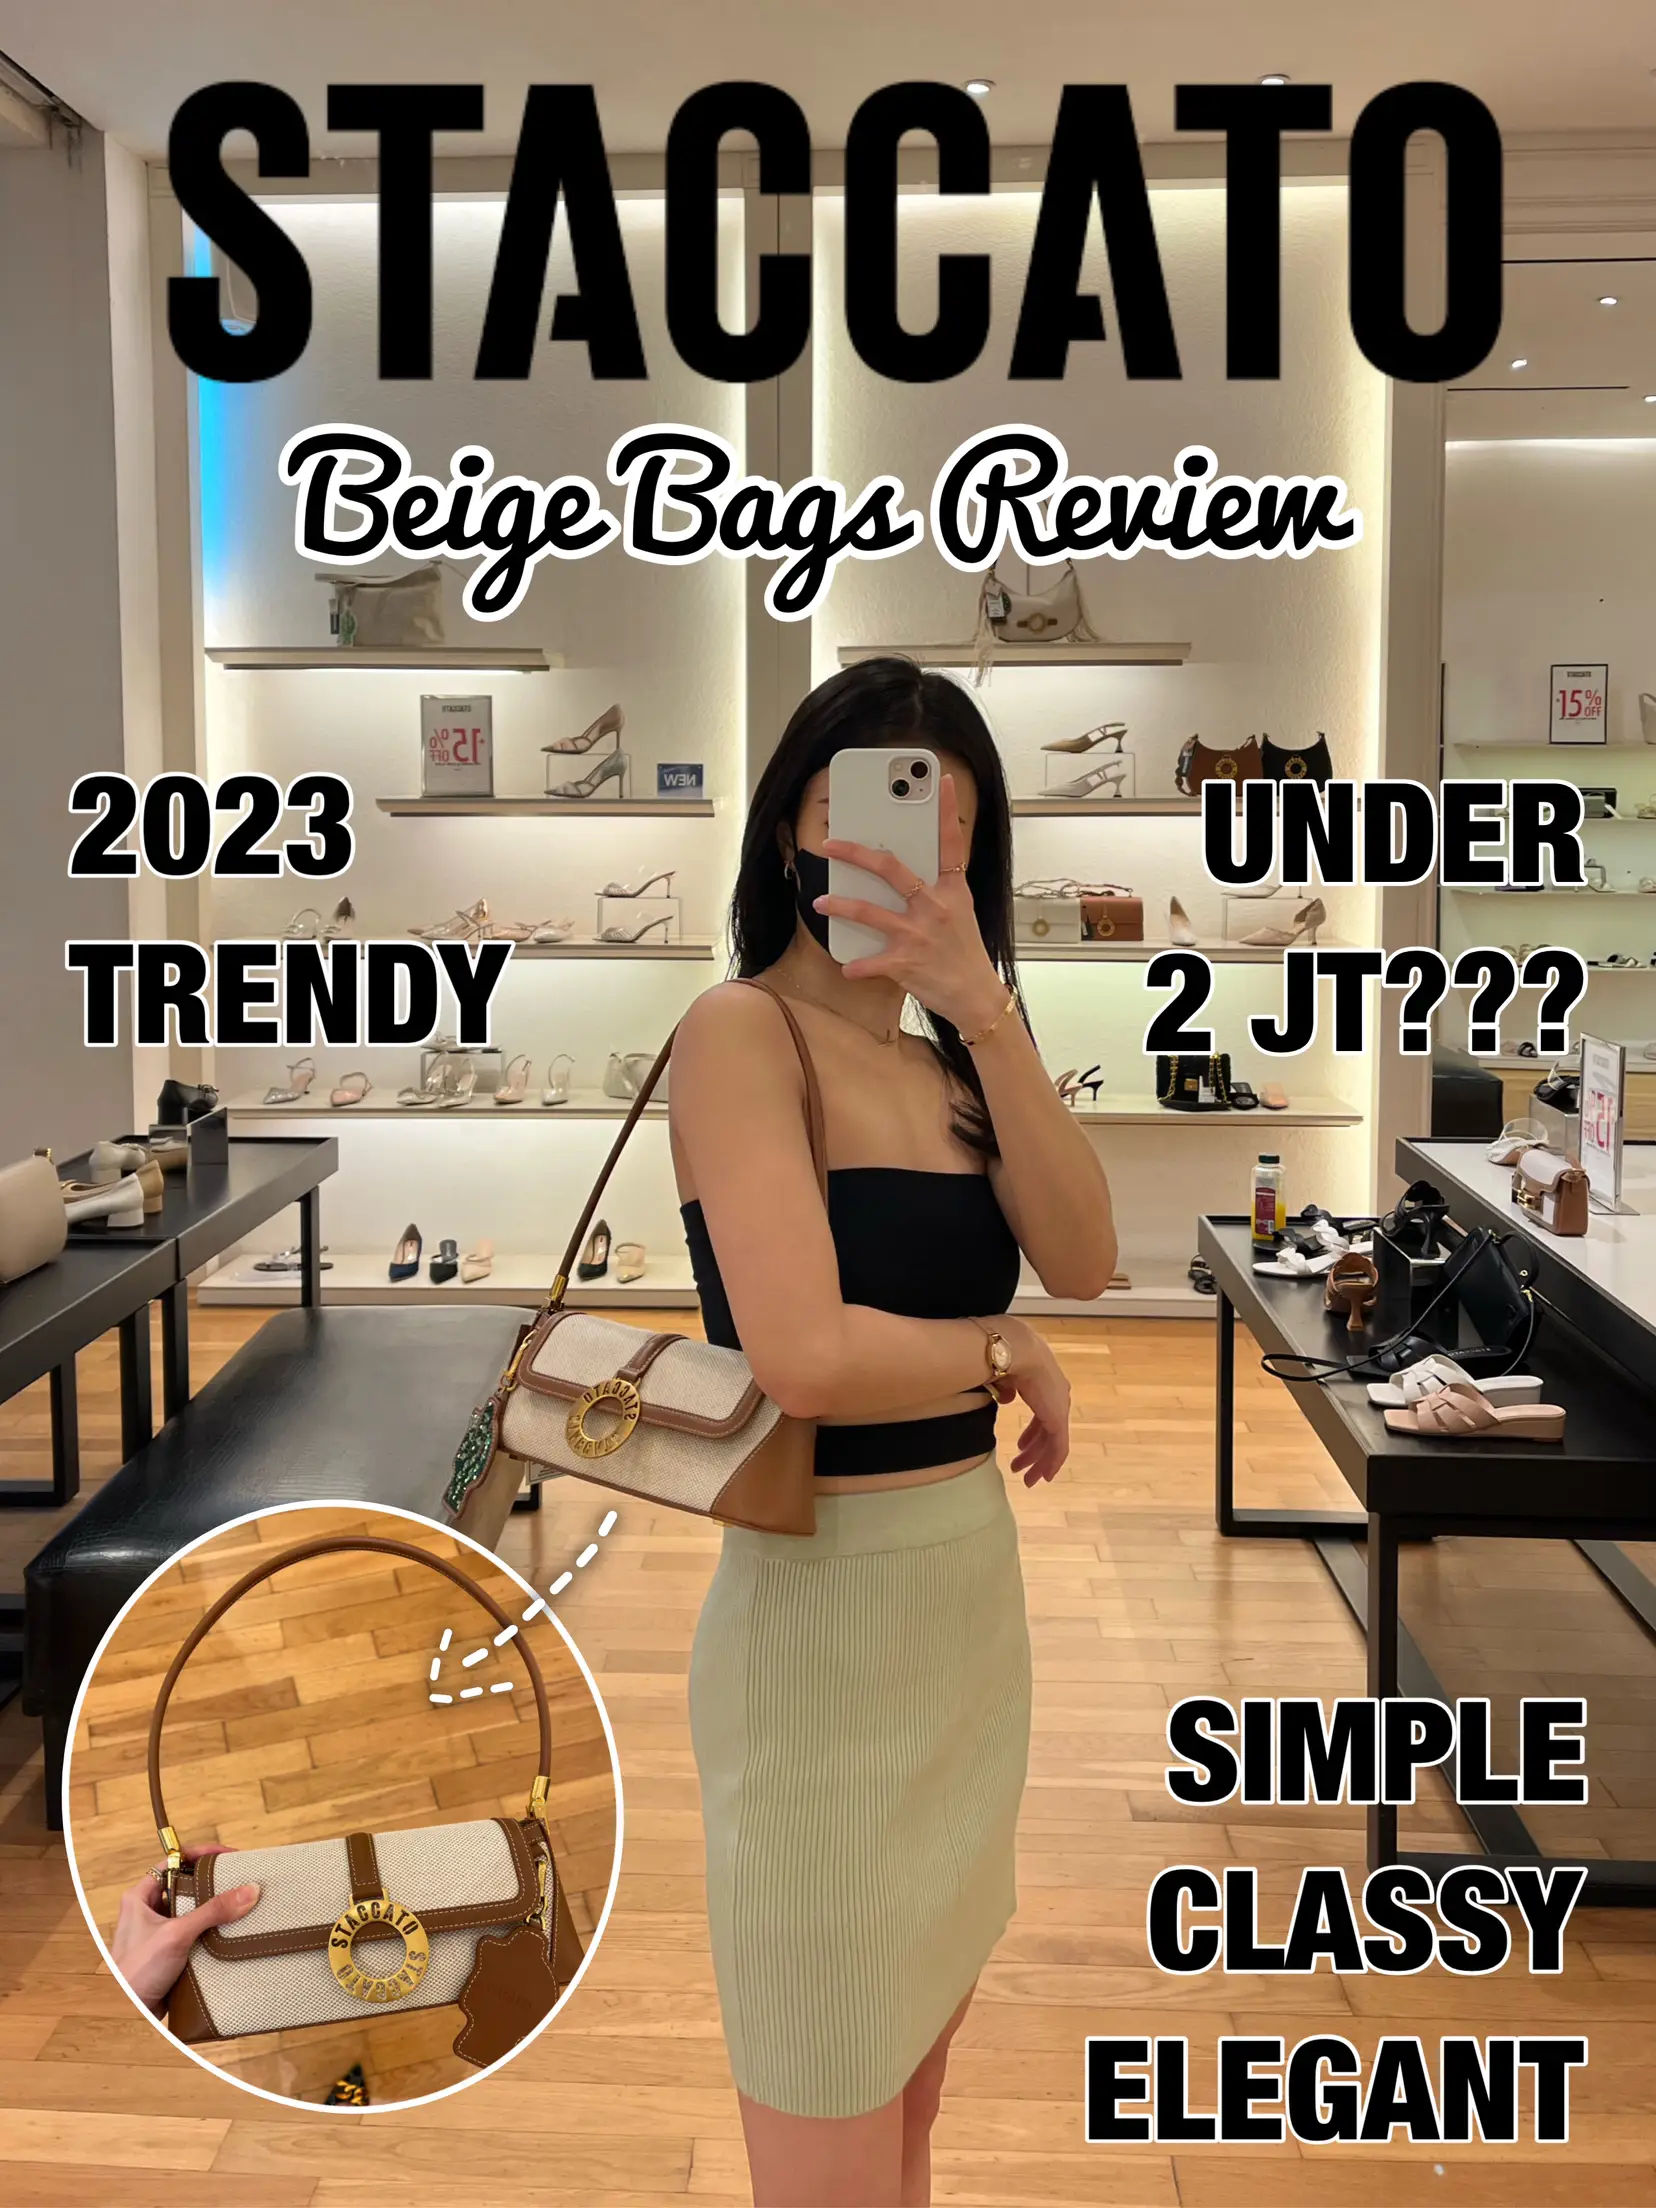 STACCATO” Beige Bags Review✨, Gallery posted by Karina Y